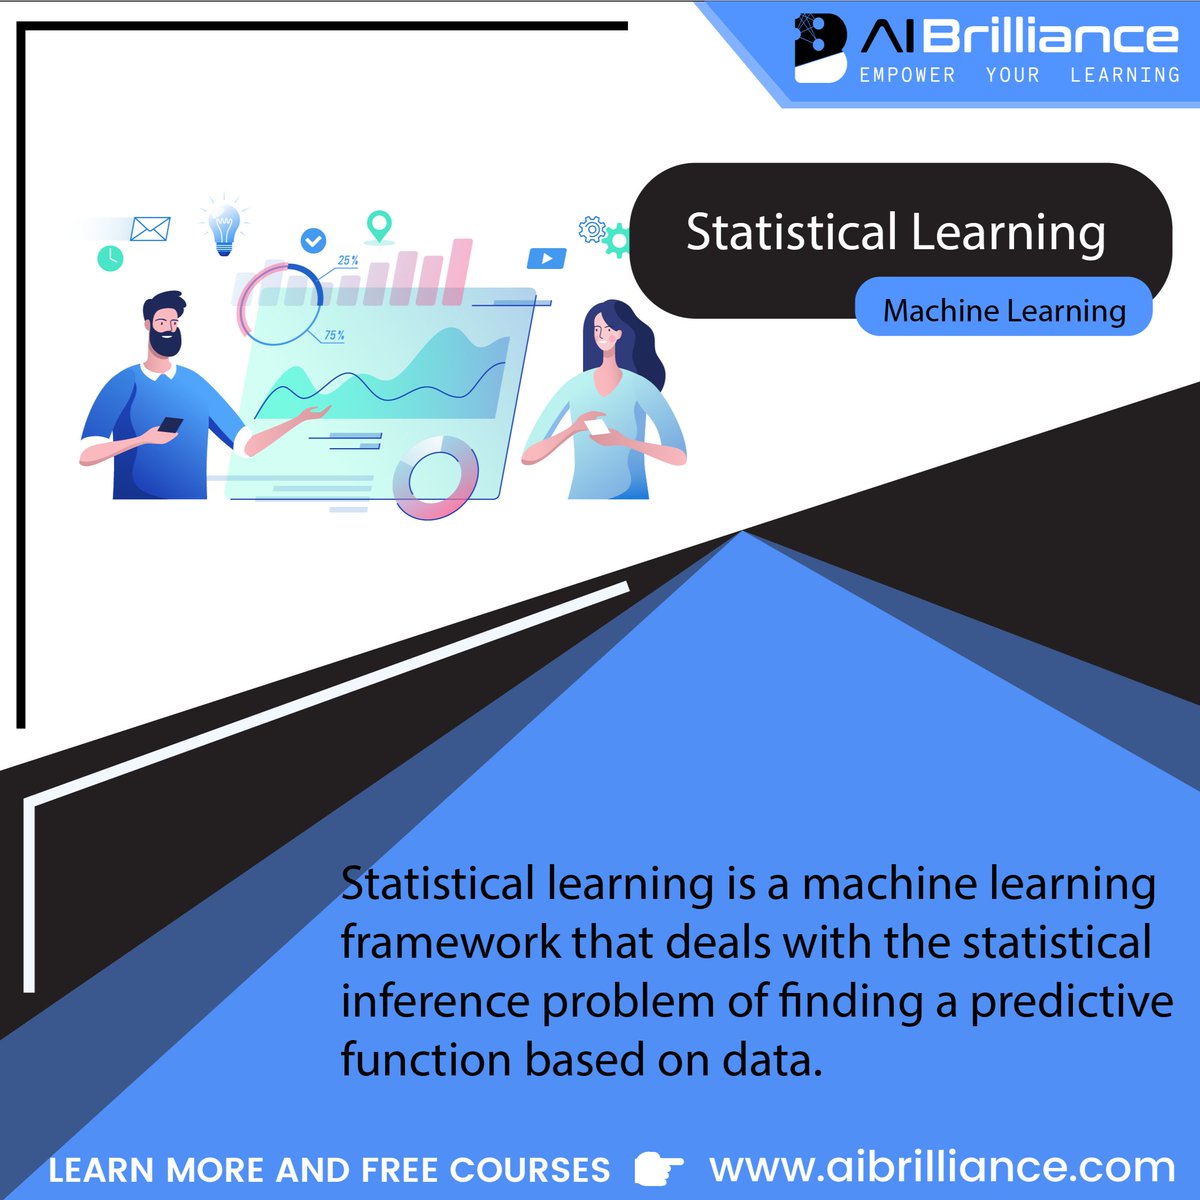 Unraveling the Art of Statistical Learning 📊✨ #StatisticalLearning #DataScience #MachineLearning #Analytics #PredictiveModeling #DataDriven #Decisions #LearnWithData #PatternRecognition #StatisticalModels #DataGeeks #DataAnalysis #Statistics #DataMining #InferentialPower